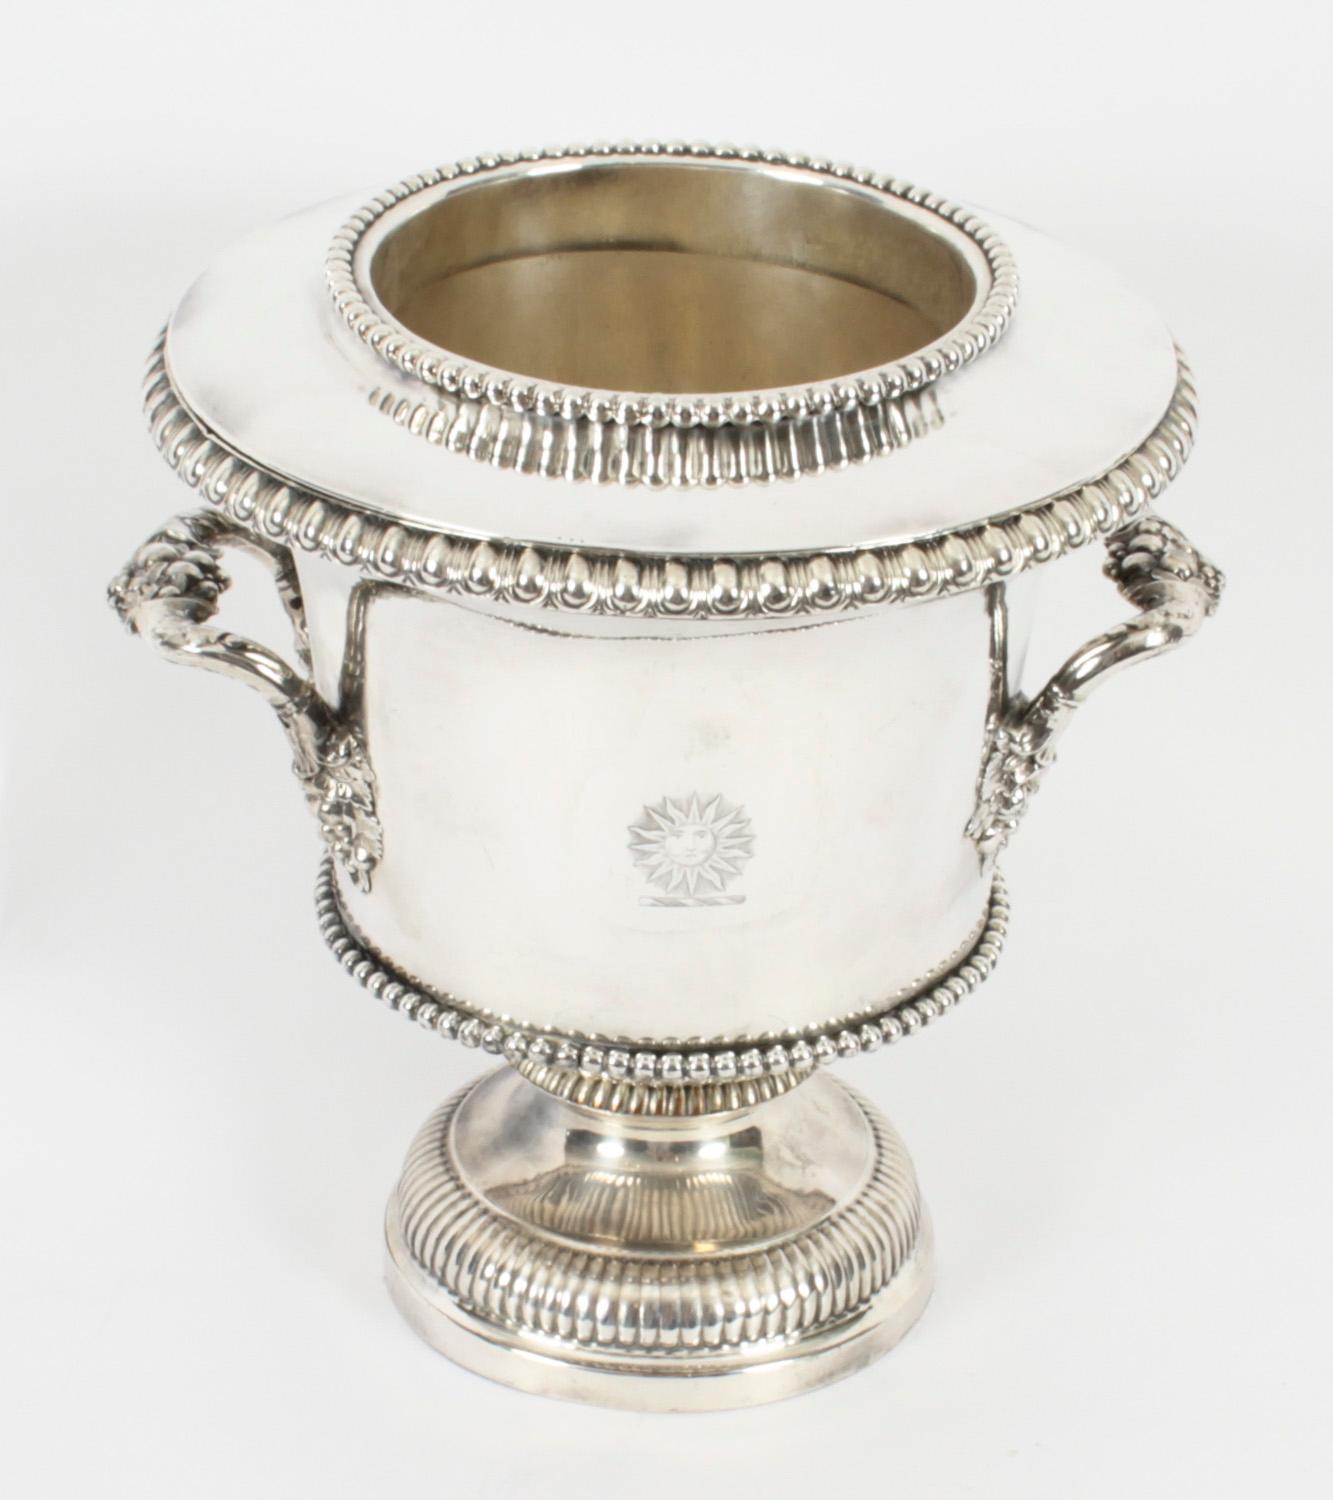 This is an exceptional pair of antique English Old Sheffield Plate silver on copper wine cooler bearing the Pearson family crest, circa 1820 in date.
 
The wine coolers stand on widespread circular pedestal bases with fluted decoration and the